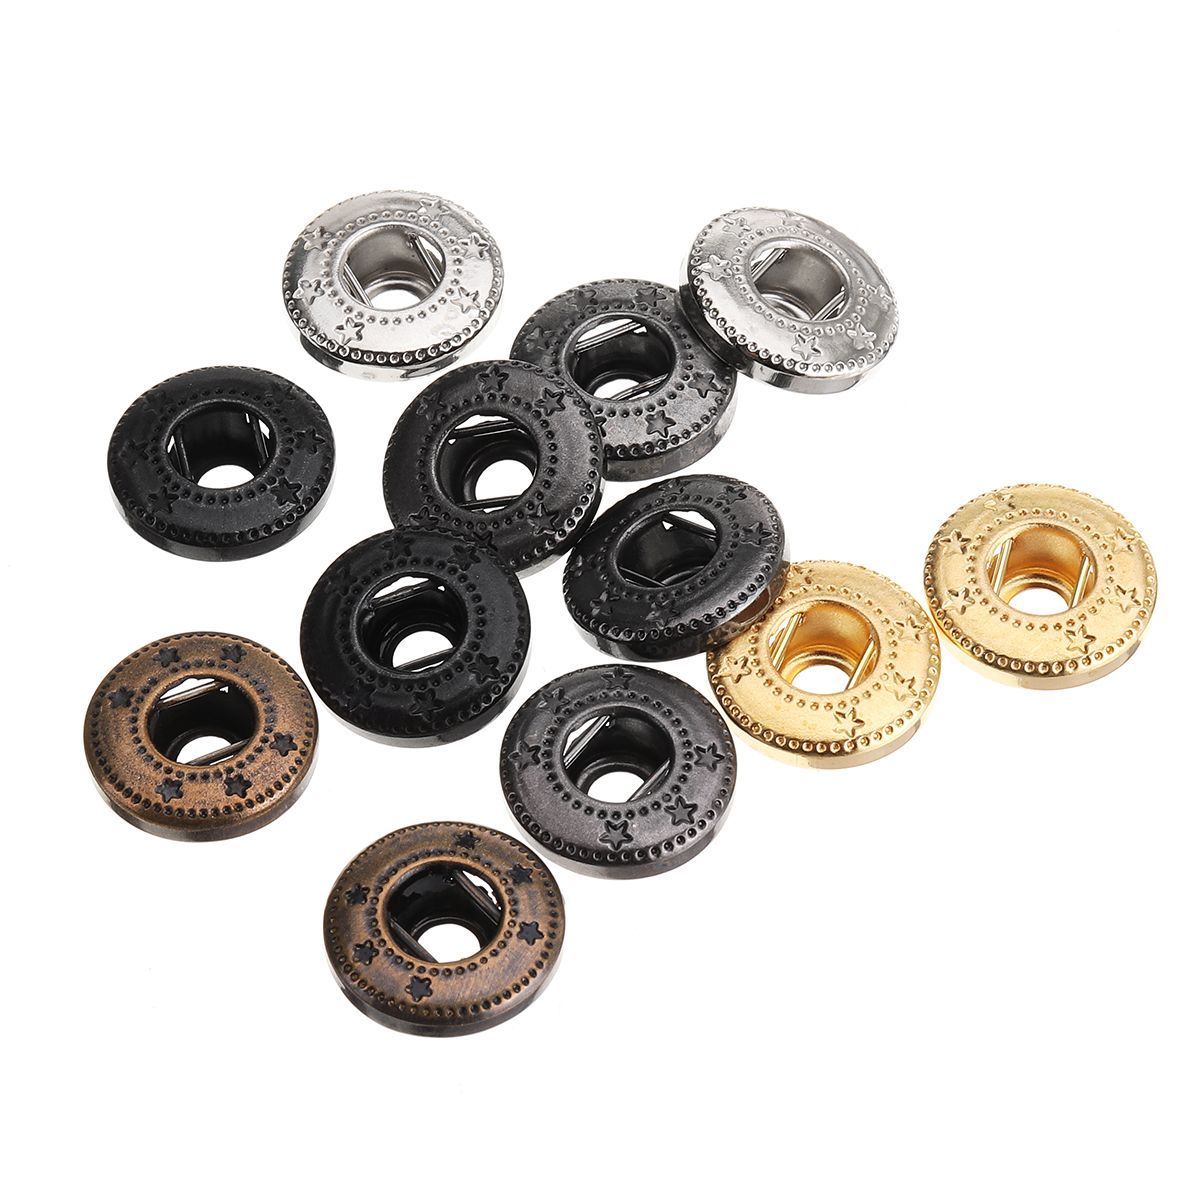 Metal-Snap-Press-Fastener-Stud-Popper-Button-Leather-Fabric-Jean-Fixing-Tools-Kit-1558971